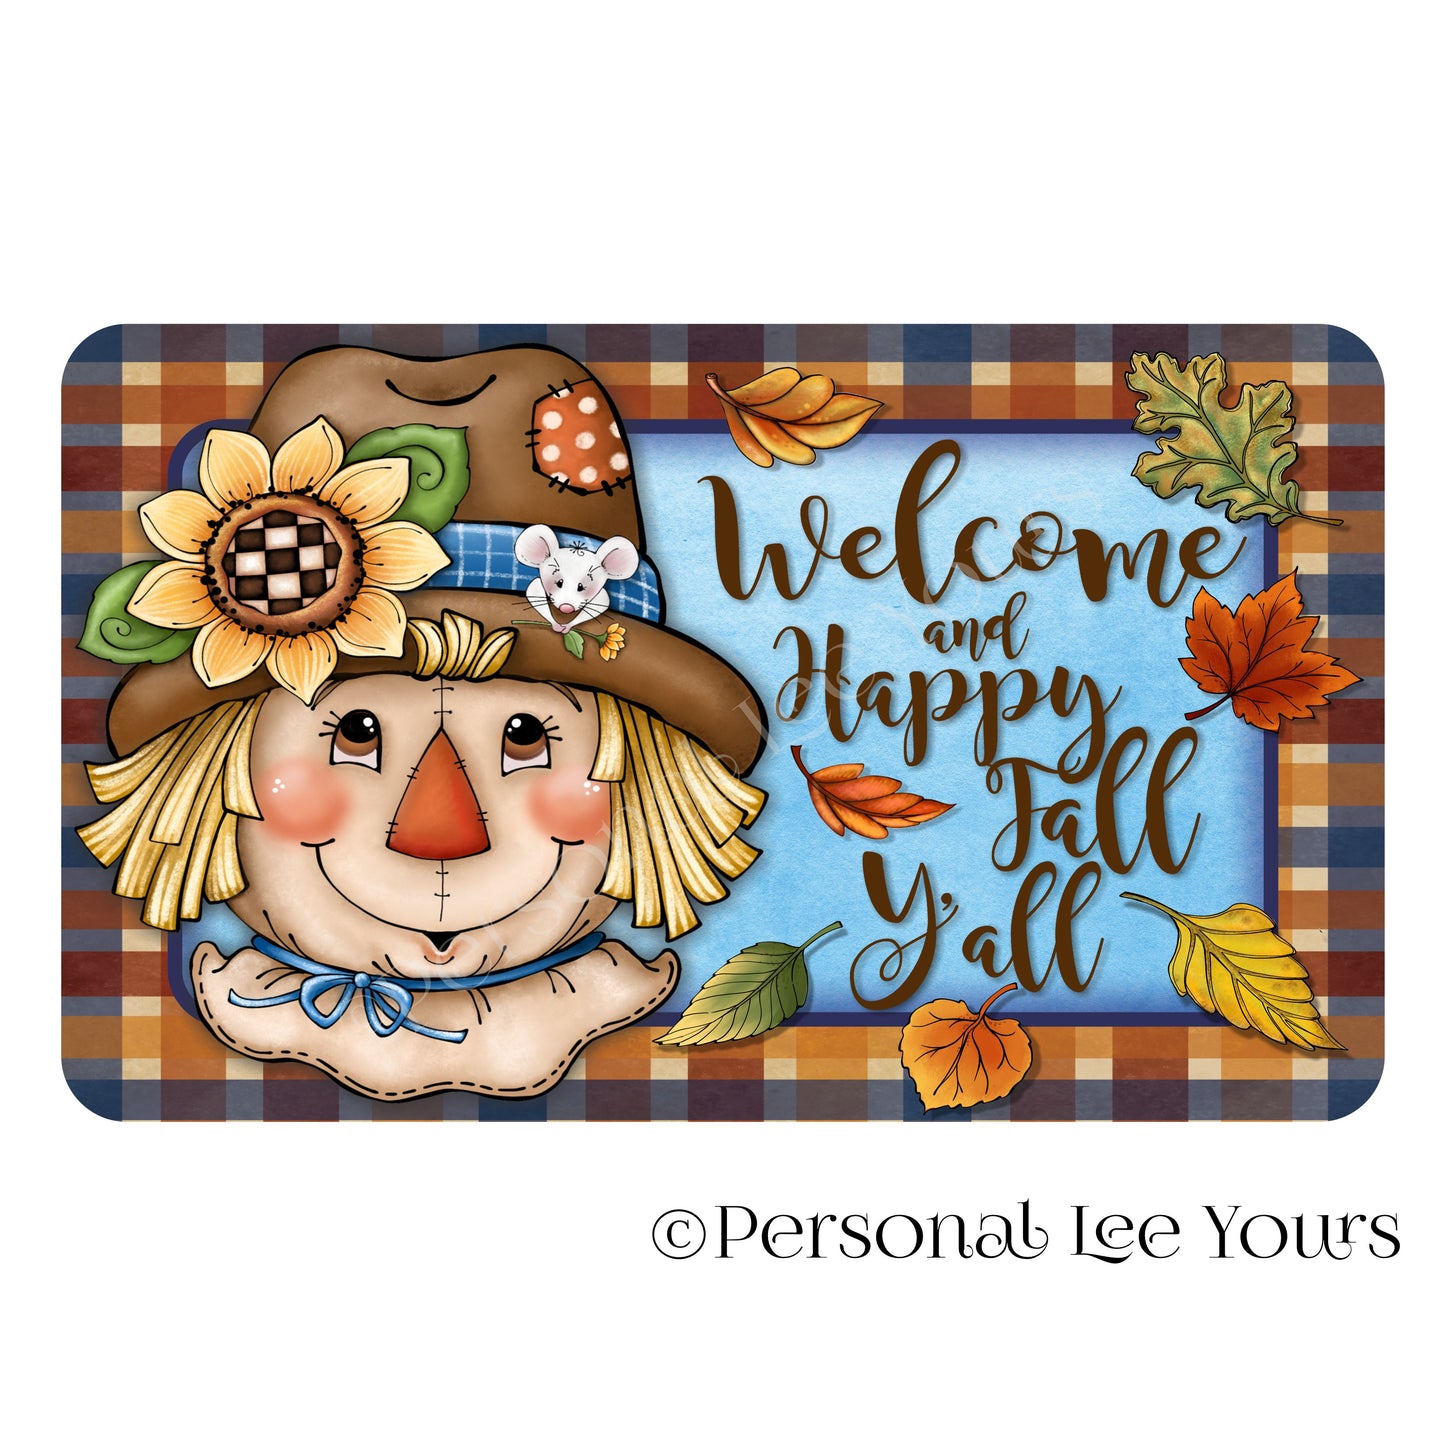 Autumn Wreath Sign * Welcome and Happy Fall Y'all * Scarecrow * 4 Sizes * Lightweight Metal